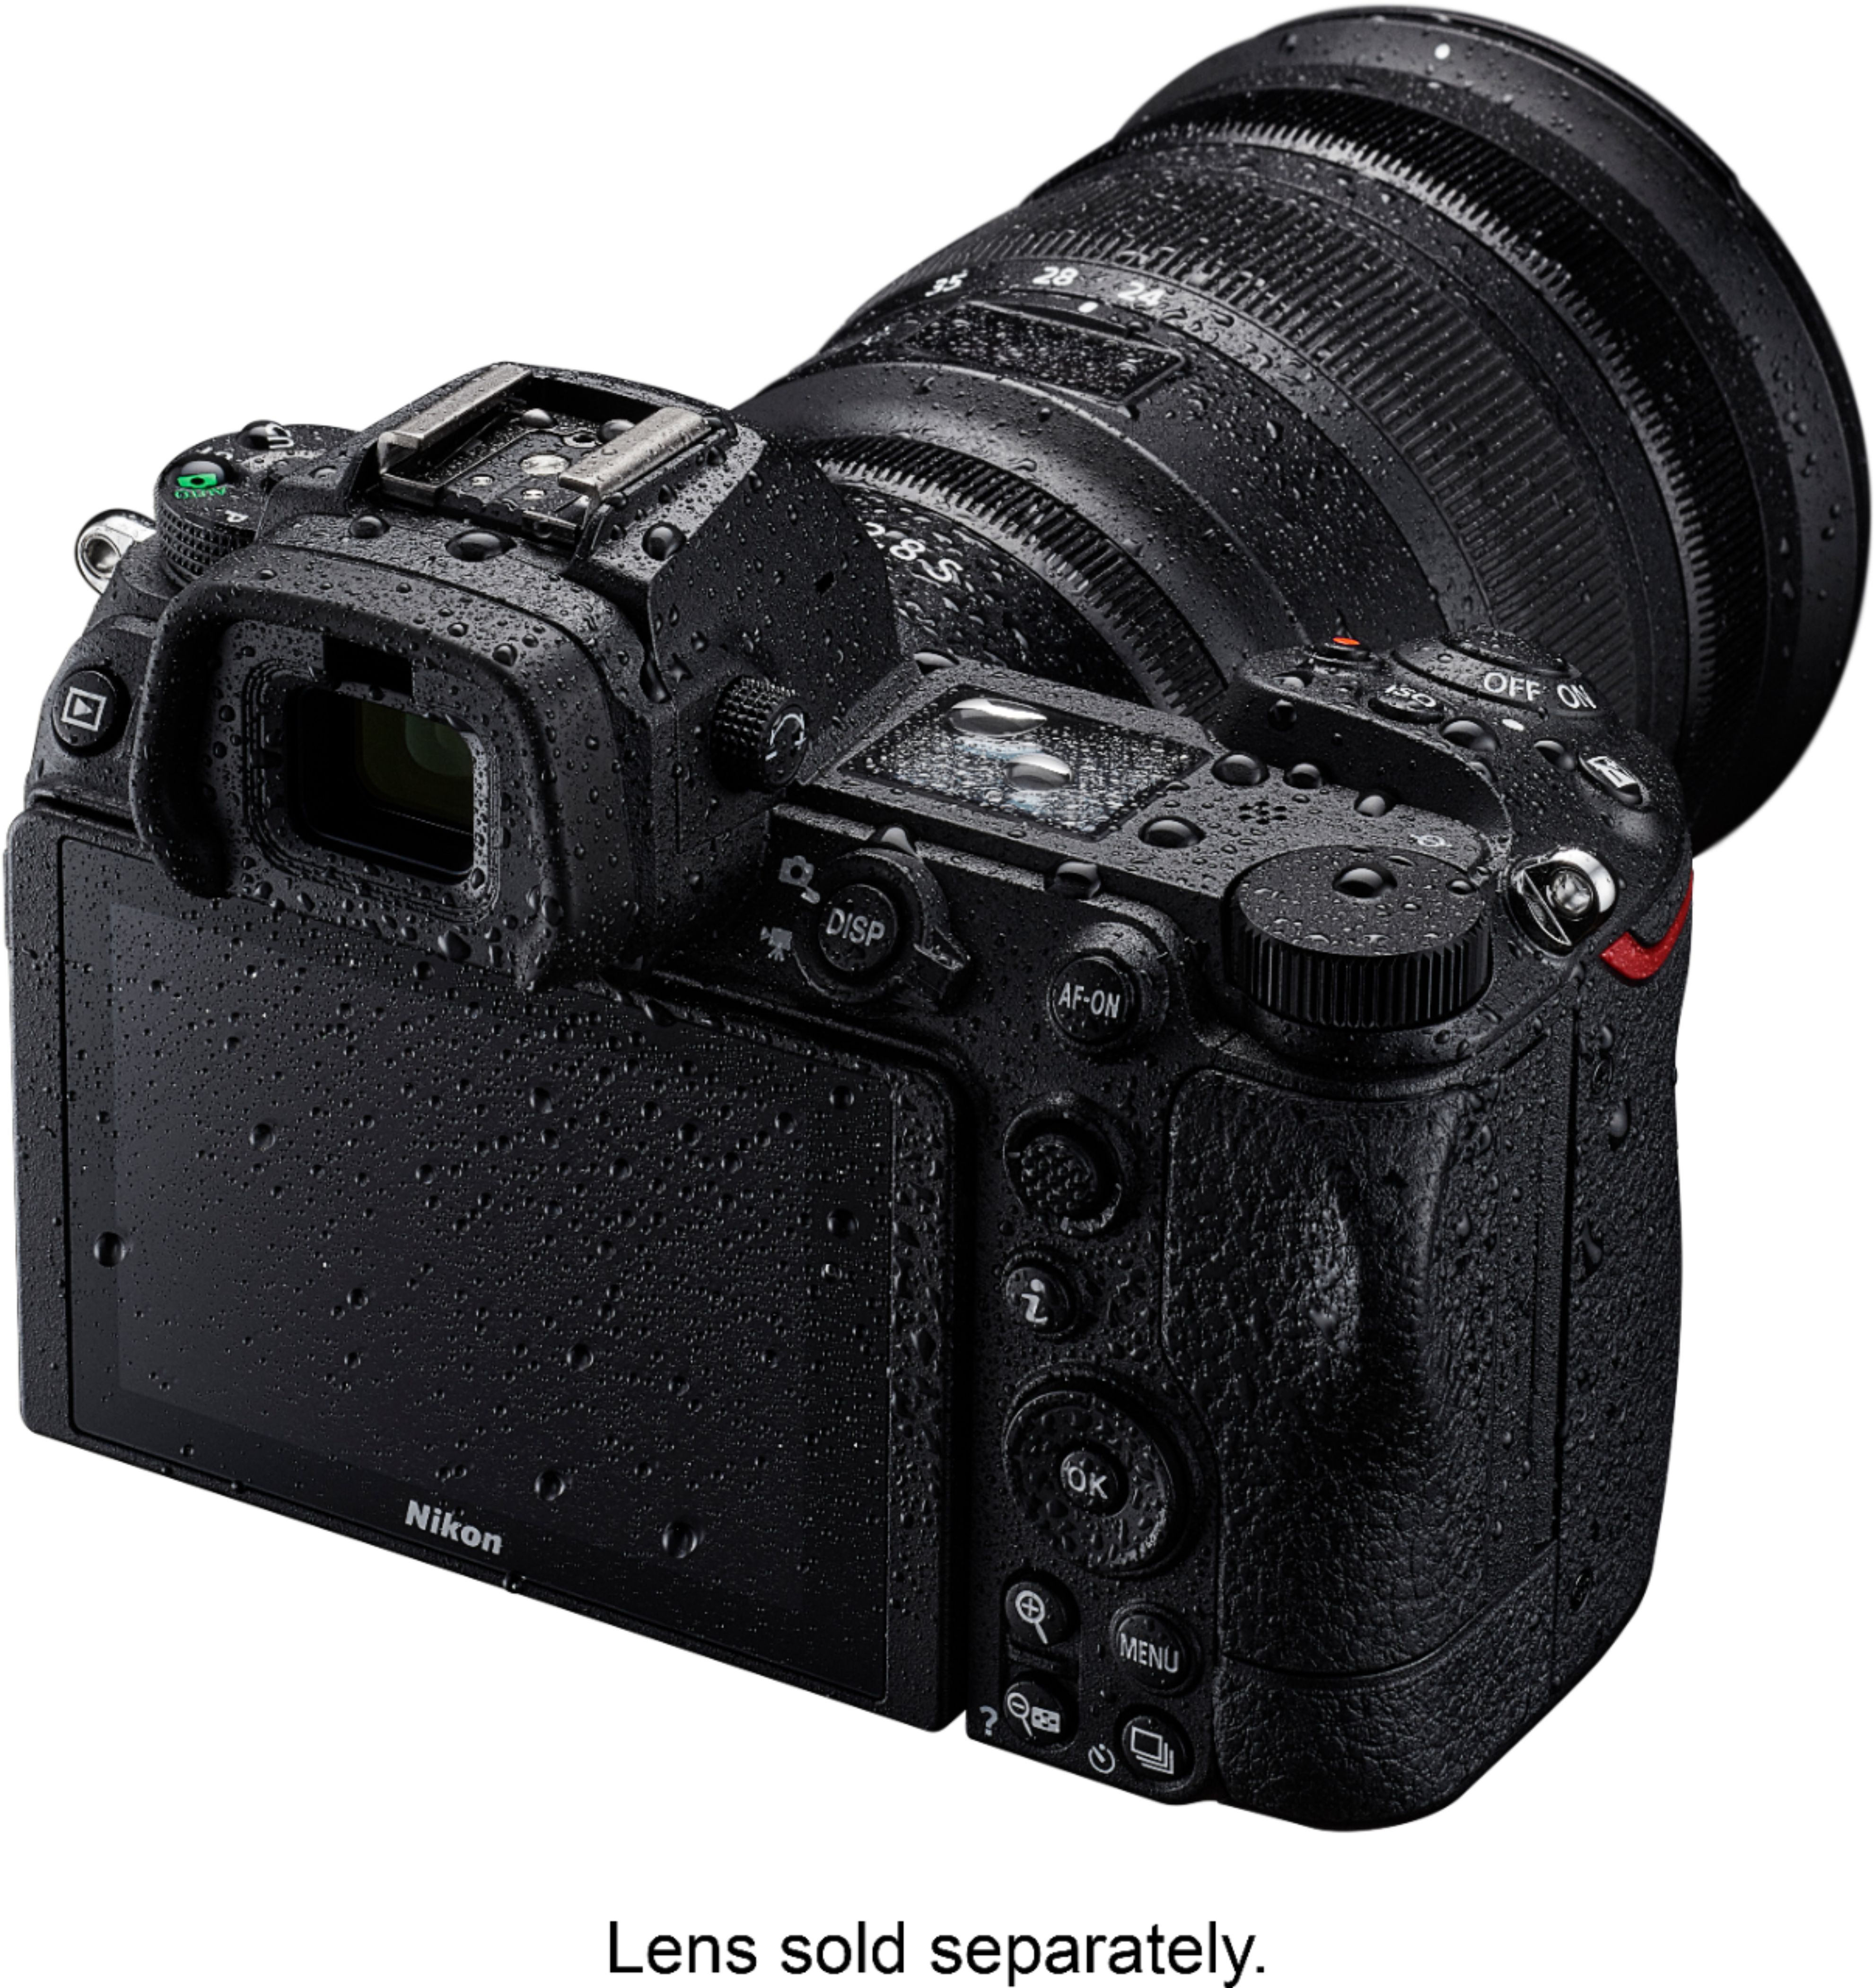 Angle View: Sony - Alpha 7S III Full-frame Mirrorless Camera (Body Only) - Black